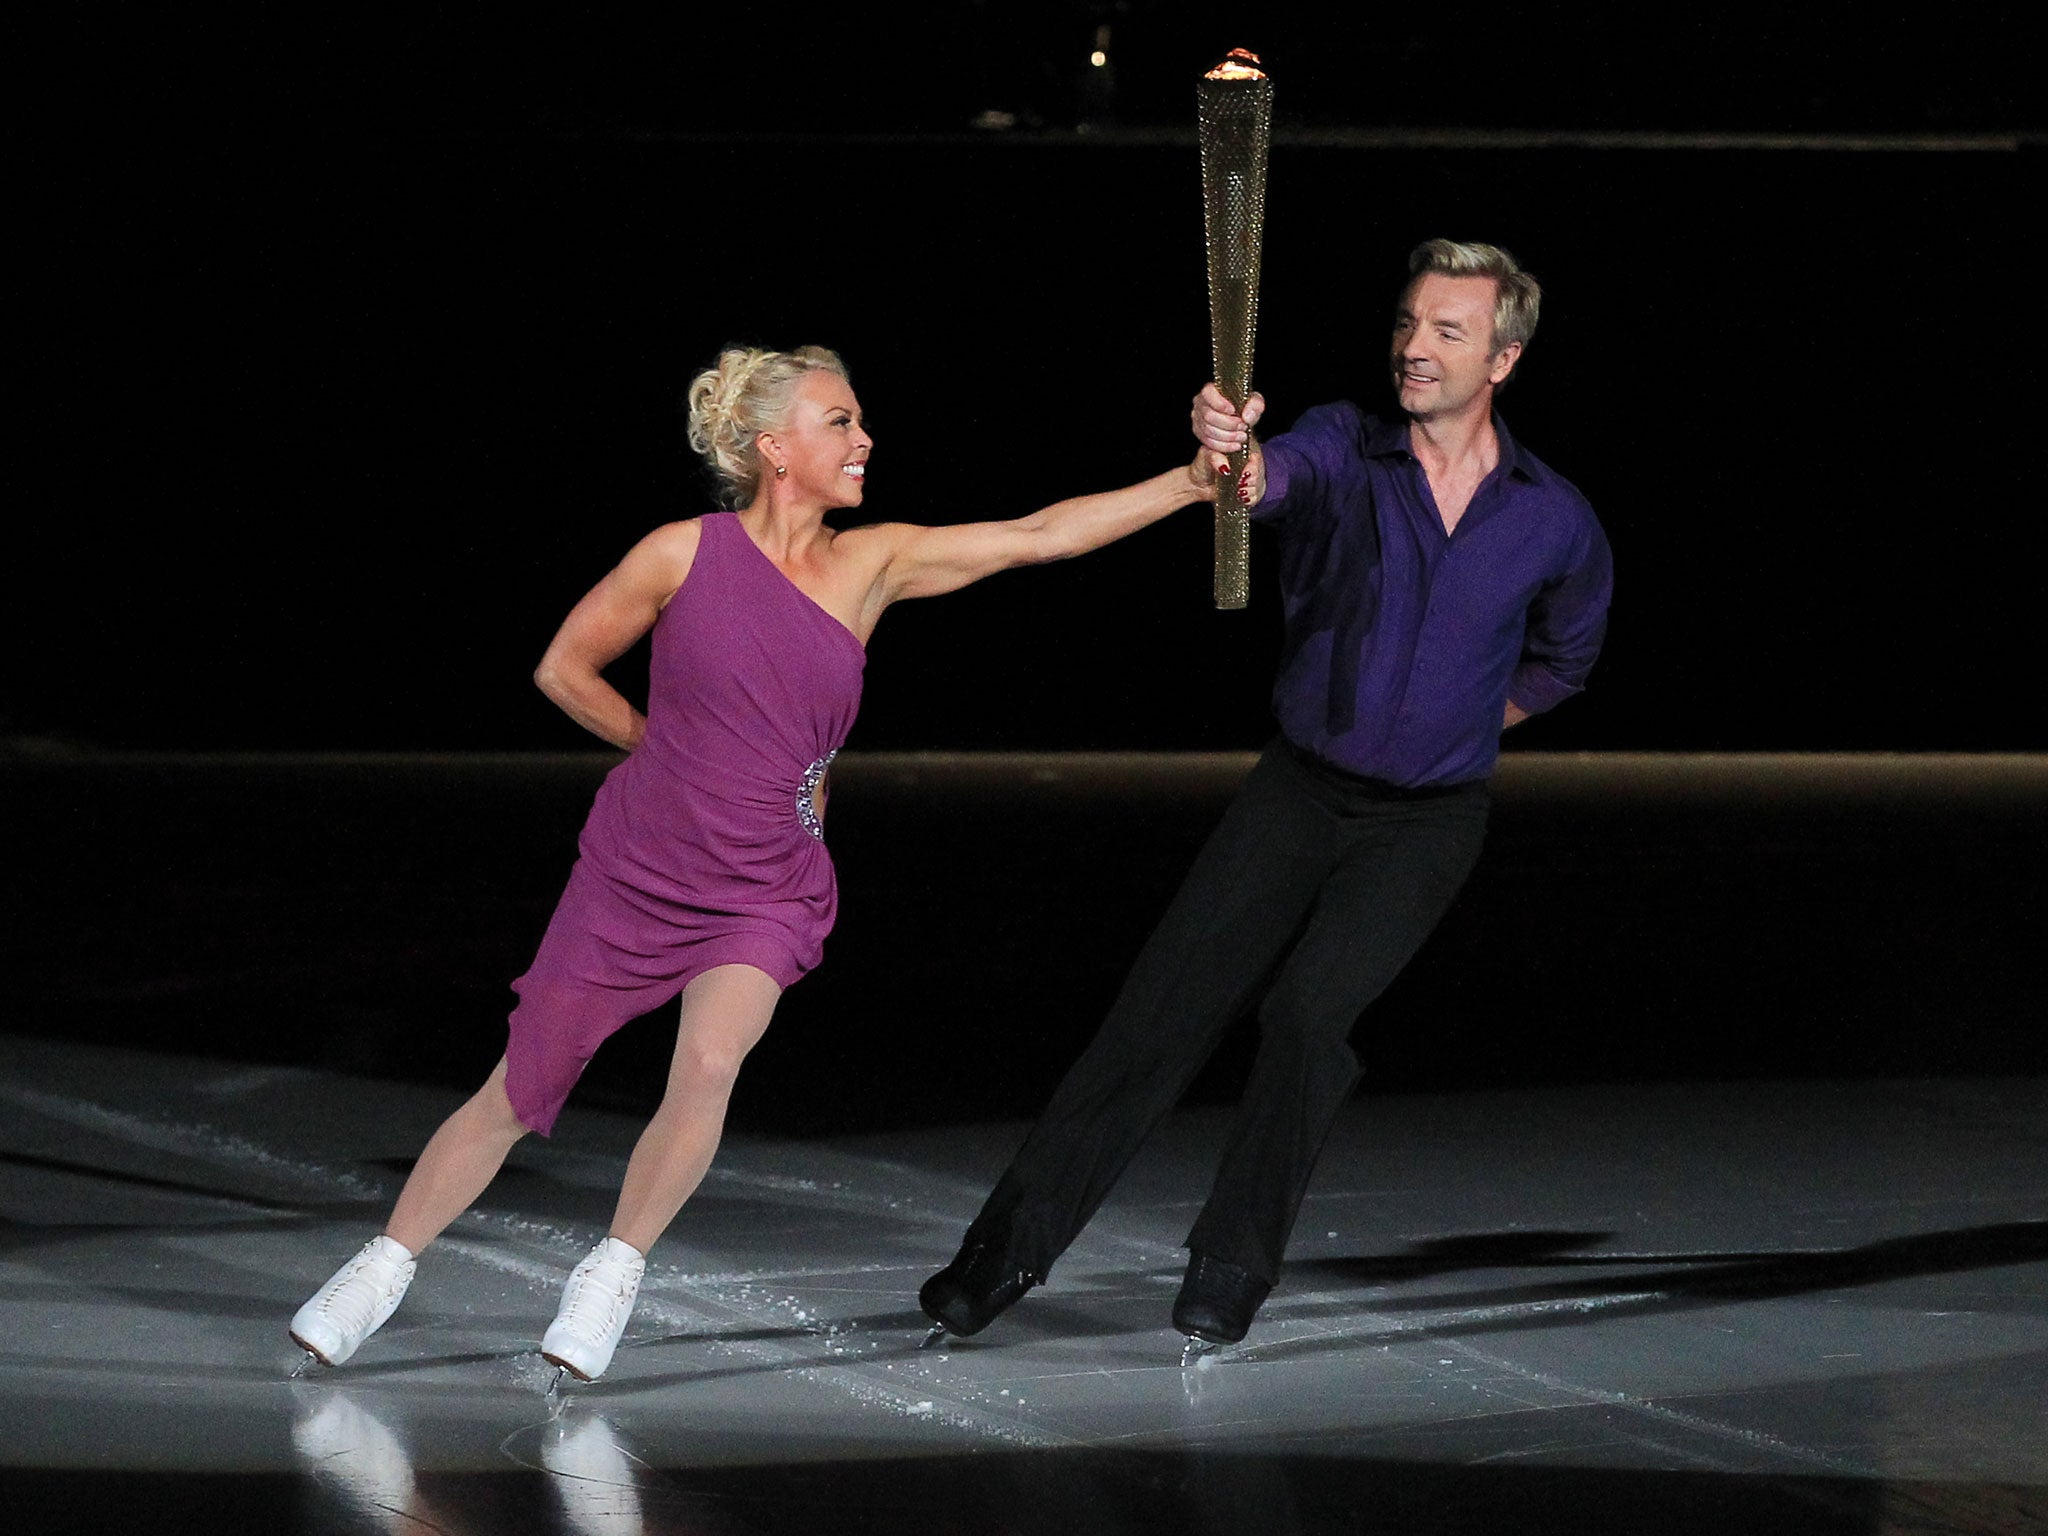 Jane Torvill and Christopher Dean will return to Sarajevo to repeat their gold-medal winning routine